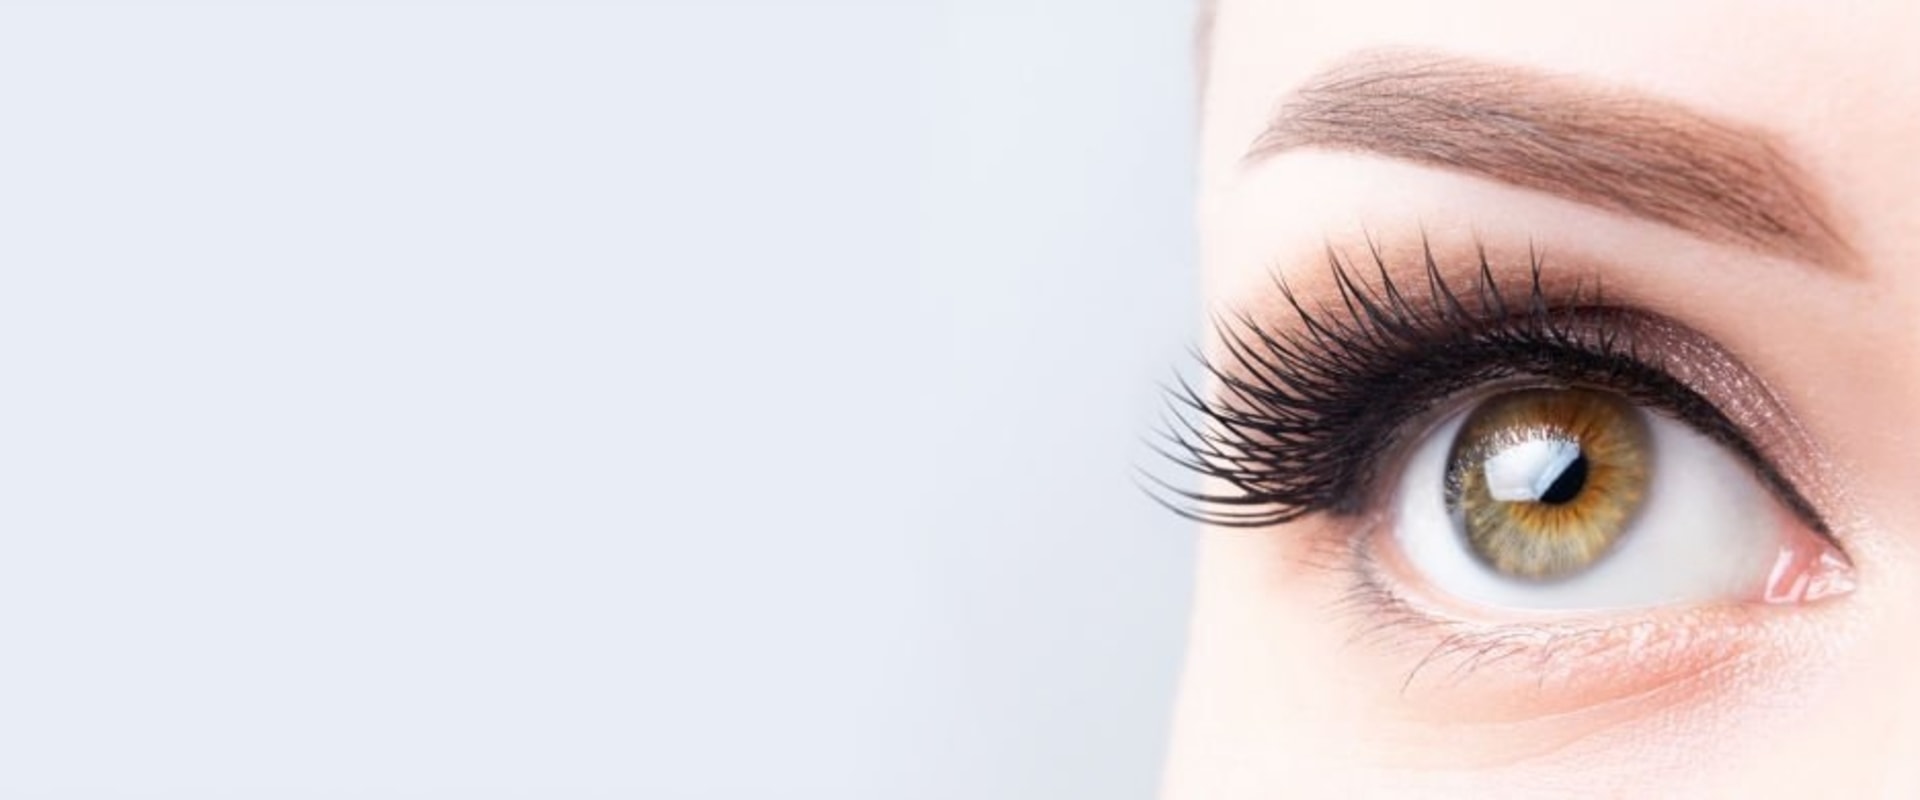 When can i stop using eyelash extensions?